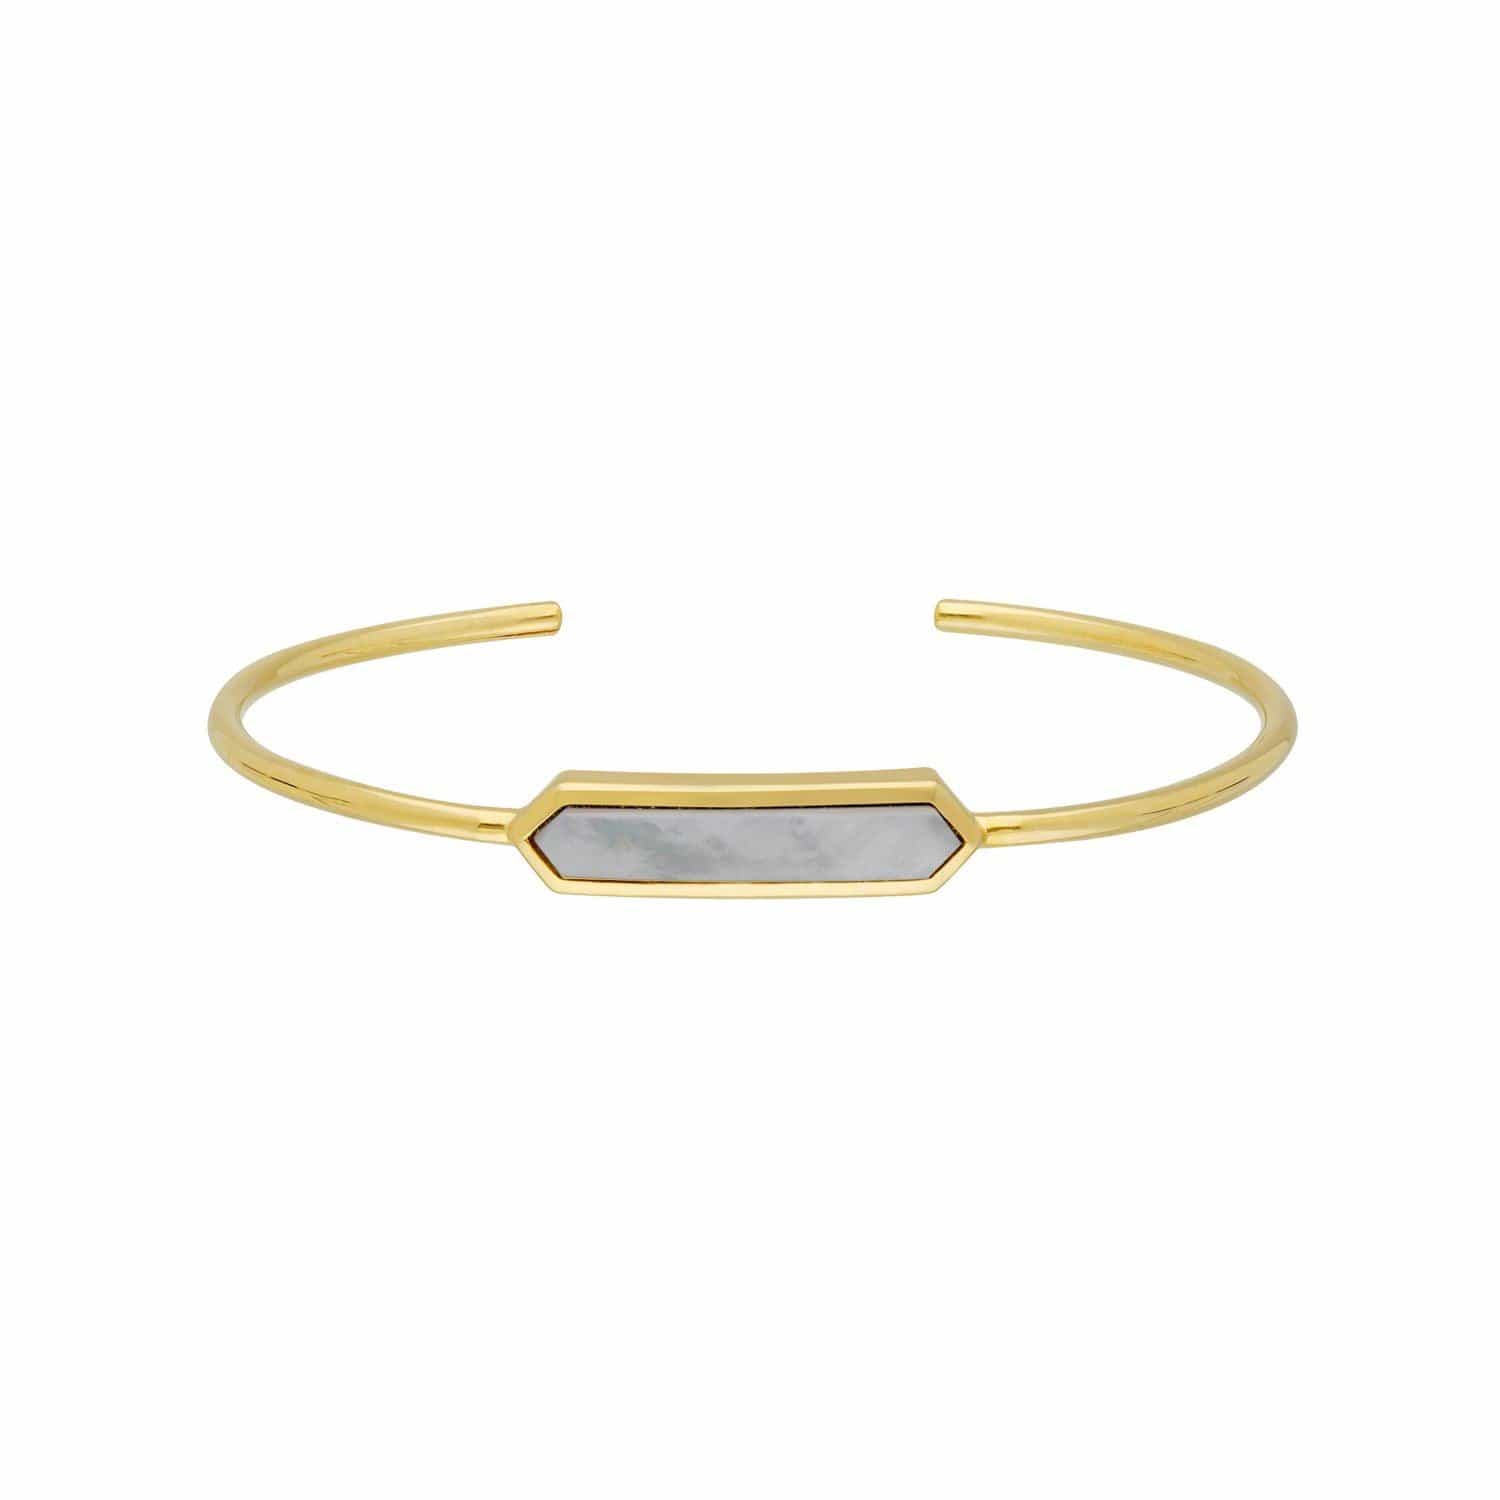 Geometric Prism Blue Lace Agate Bangle in Gold Plated Sterling Silver